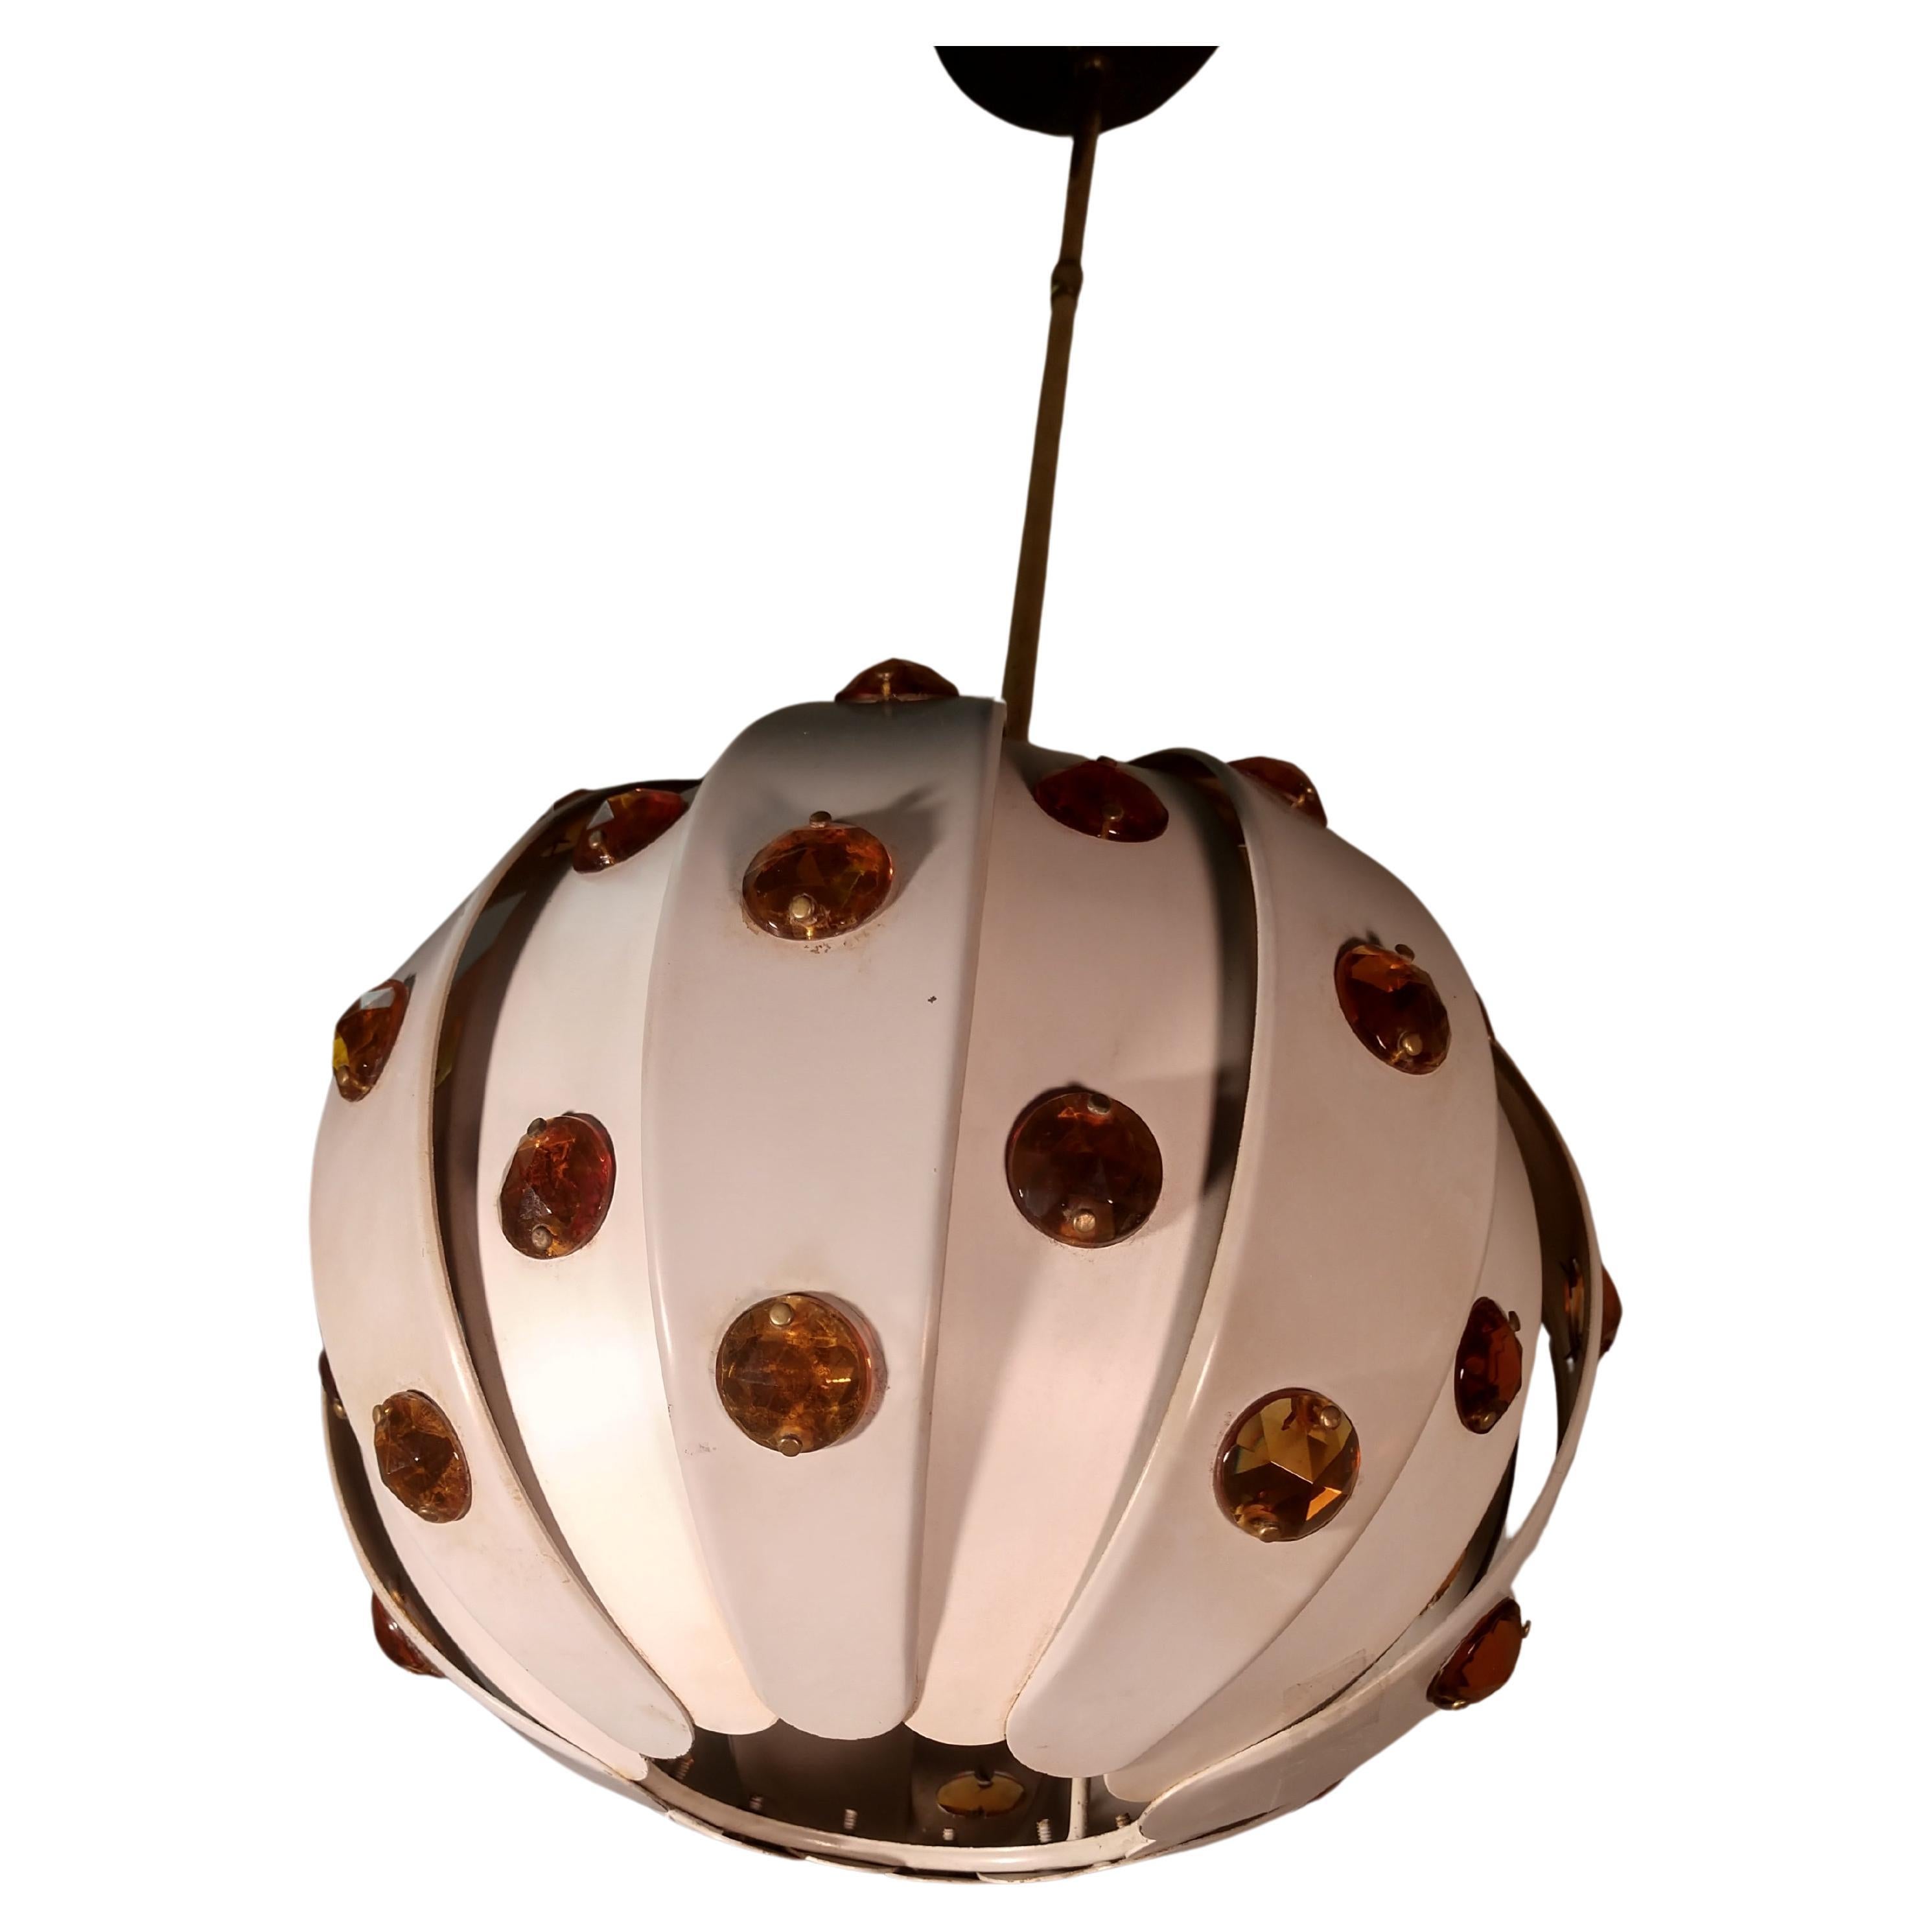 Fabulous jeweled pendant lamp which when lit illuminates the plastic Amber colored jewels. Organically styled,
with enameled metal panels imitating leaves. Adjustable down rod is brass along with ceiling canopy. In excellent vintage condition with